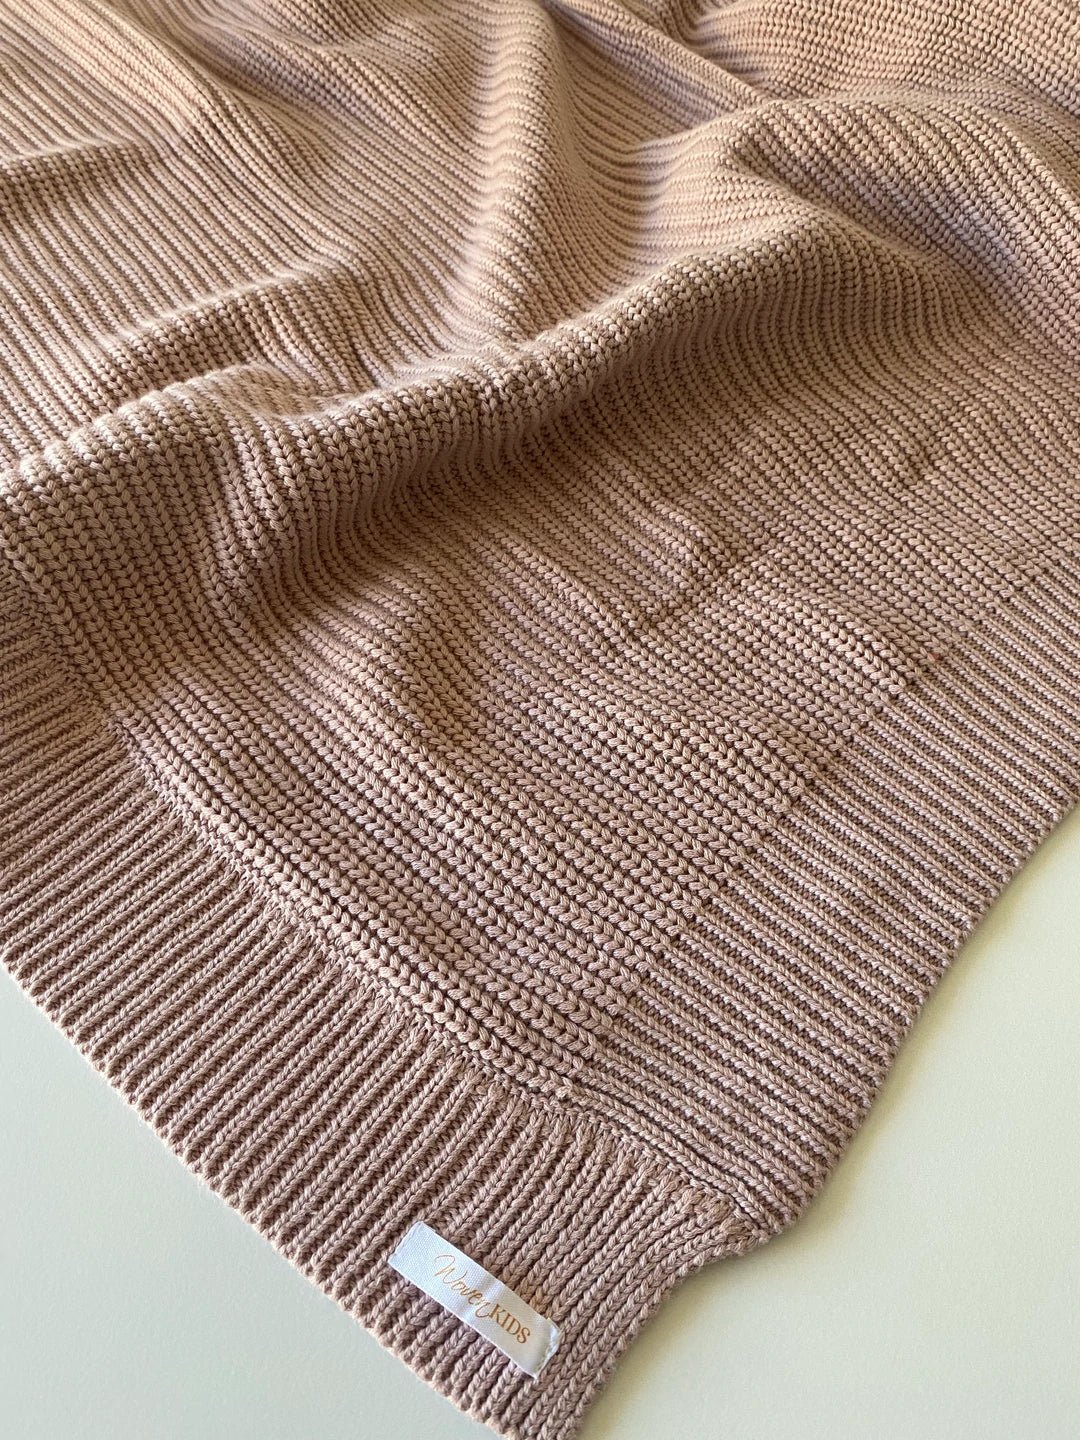 Luxe Chunky Knit Blanket | Dusty Rose - Maree Ann Co